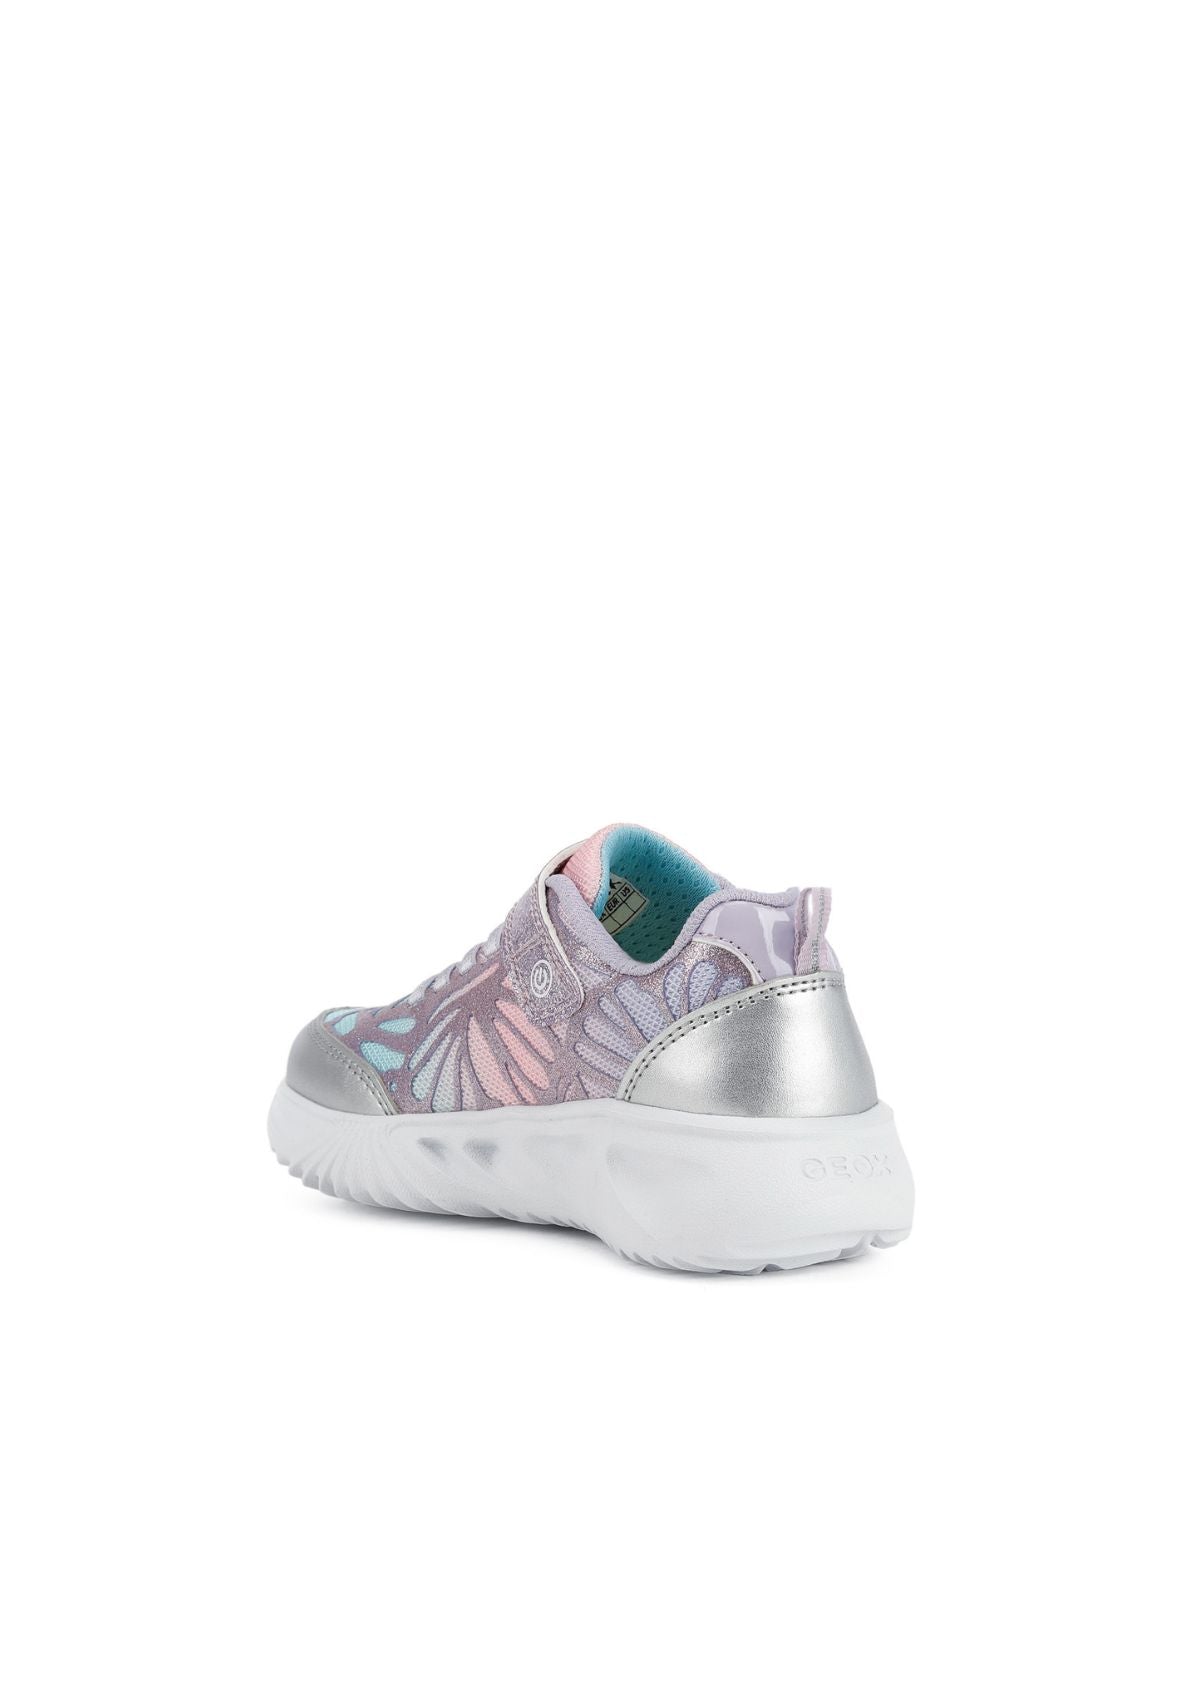 Geox Junior Girls ASSISTER Silver Lilac back